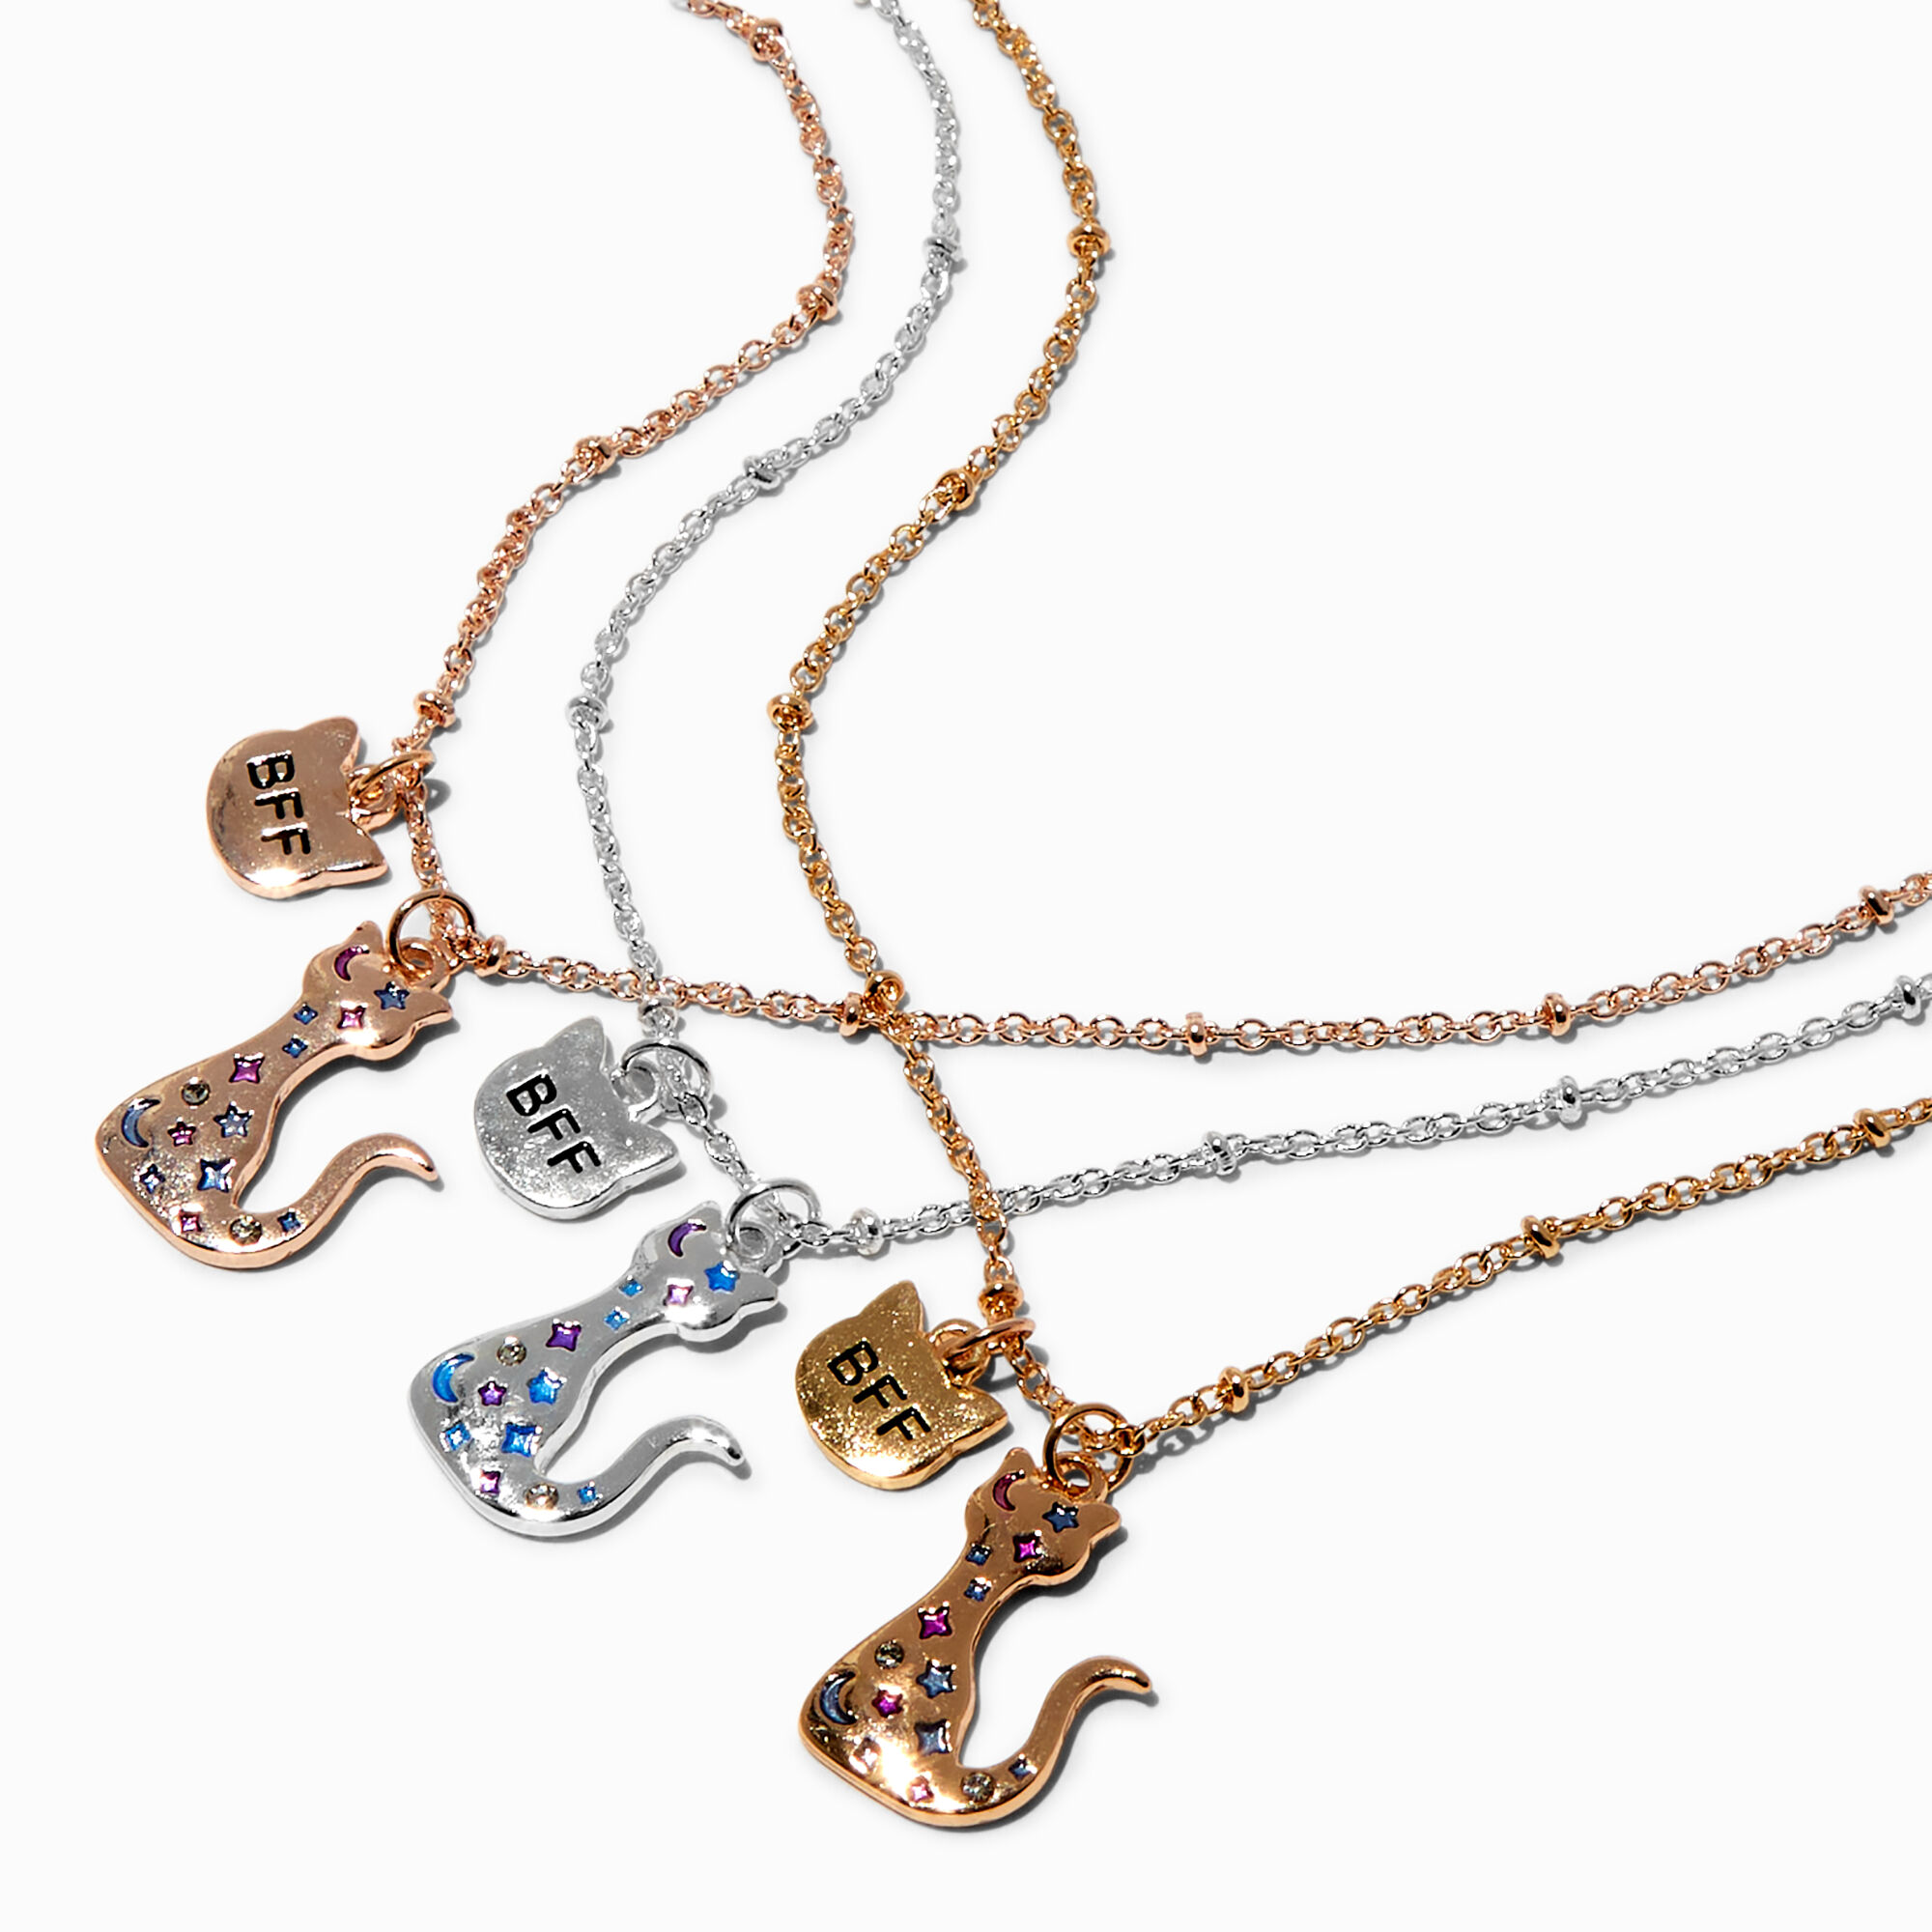 View Claires Best Friends Mixed Metal Celestial Cat Pendant Necklaces 3 Pack Rose Gold information